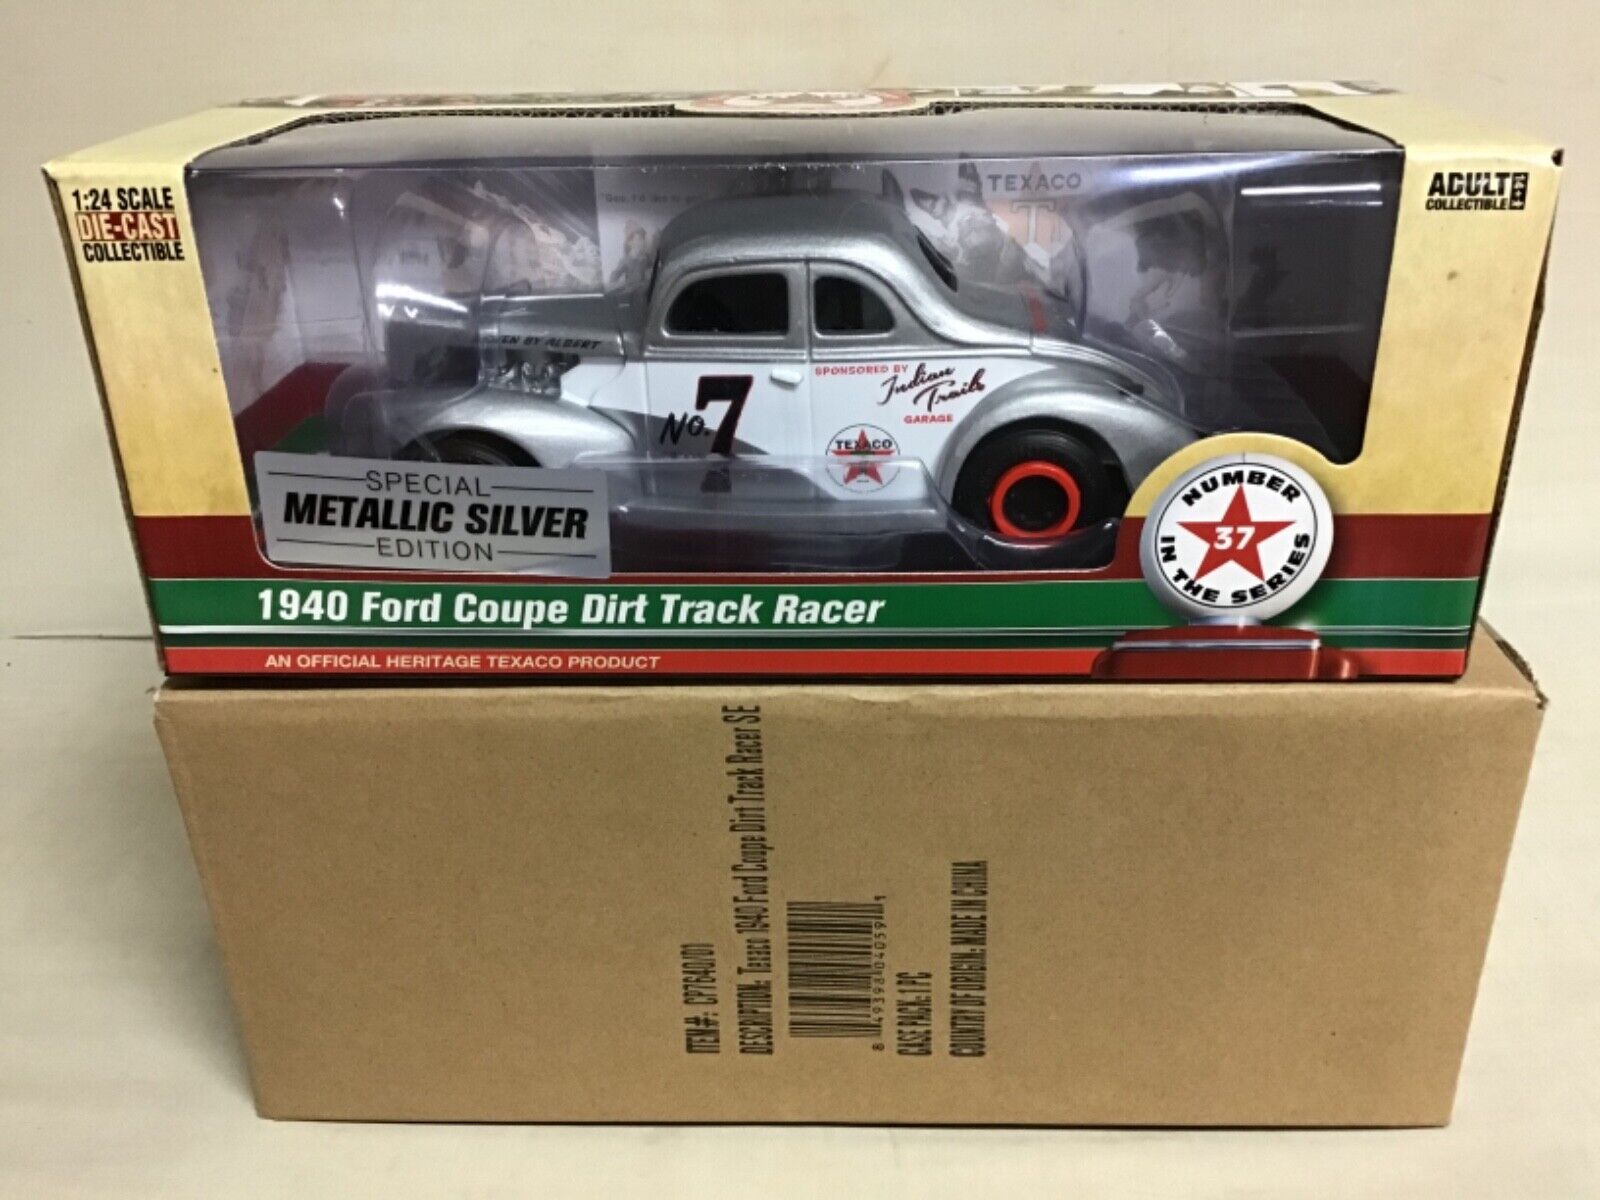 TEXACO 2020 Truck Series #37 / 1940 Ford Coupe Racer/ 1:24 scale Special edition